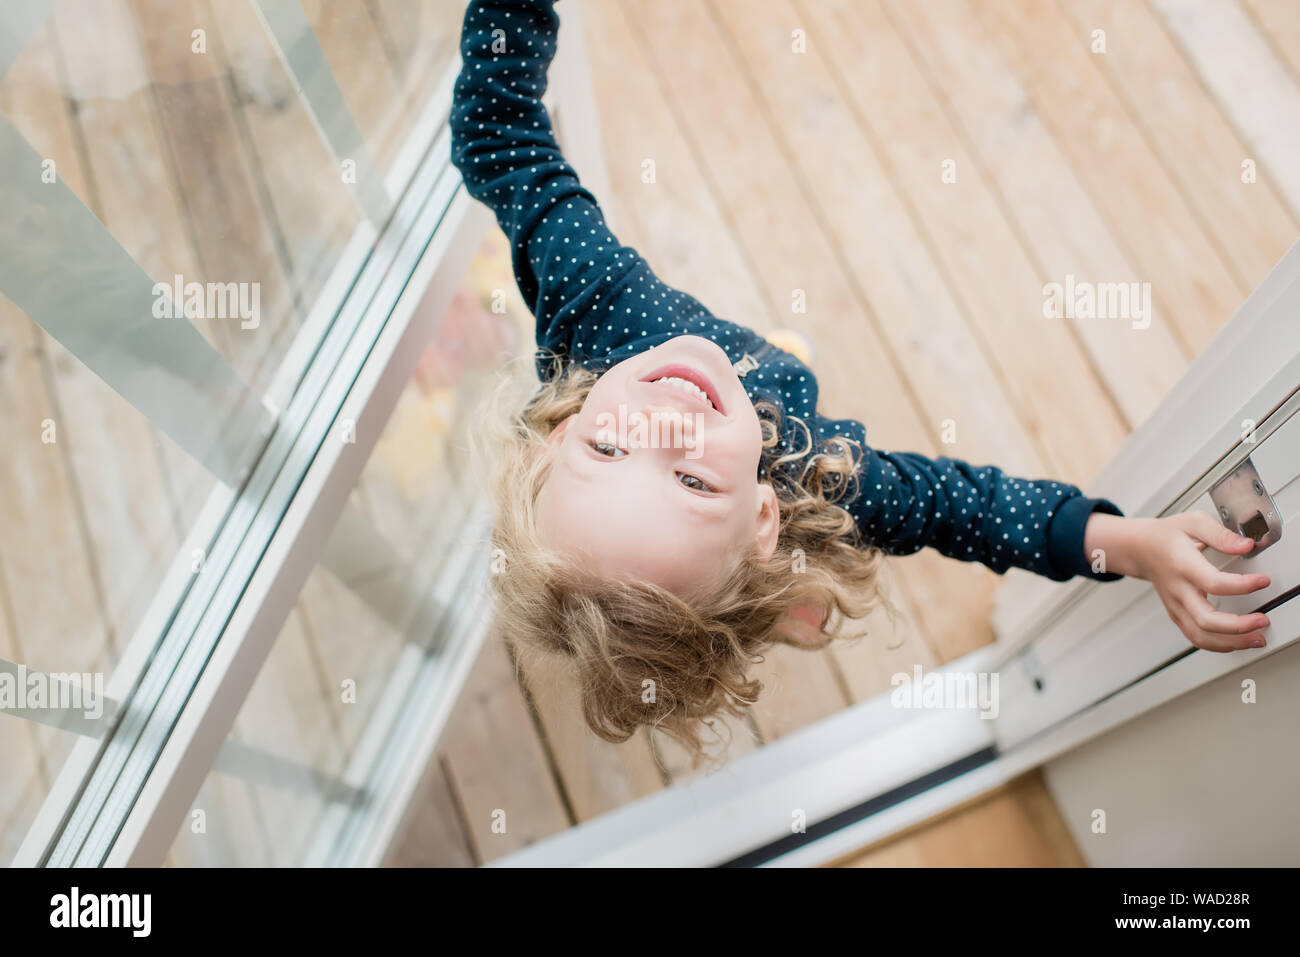 girl standing in the doorway at home laughing looking upside down Stock Photo